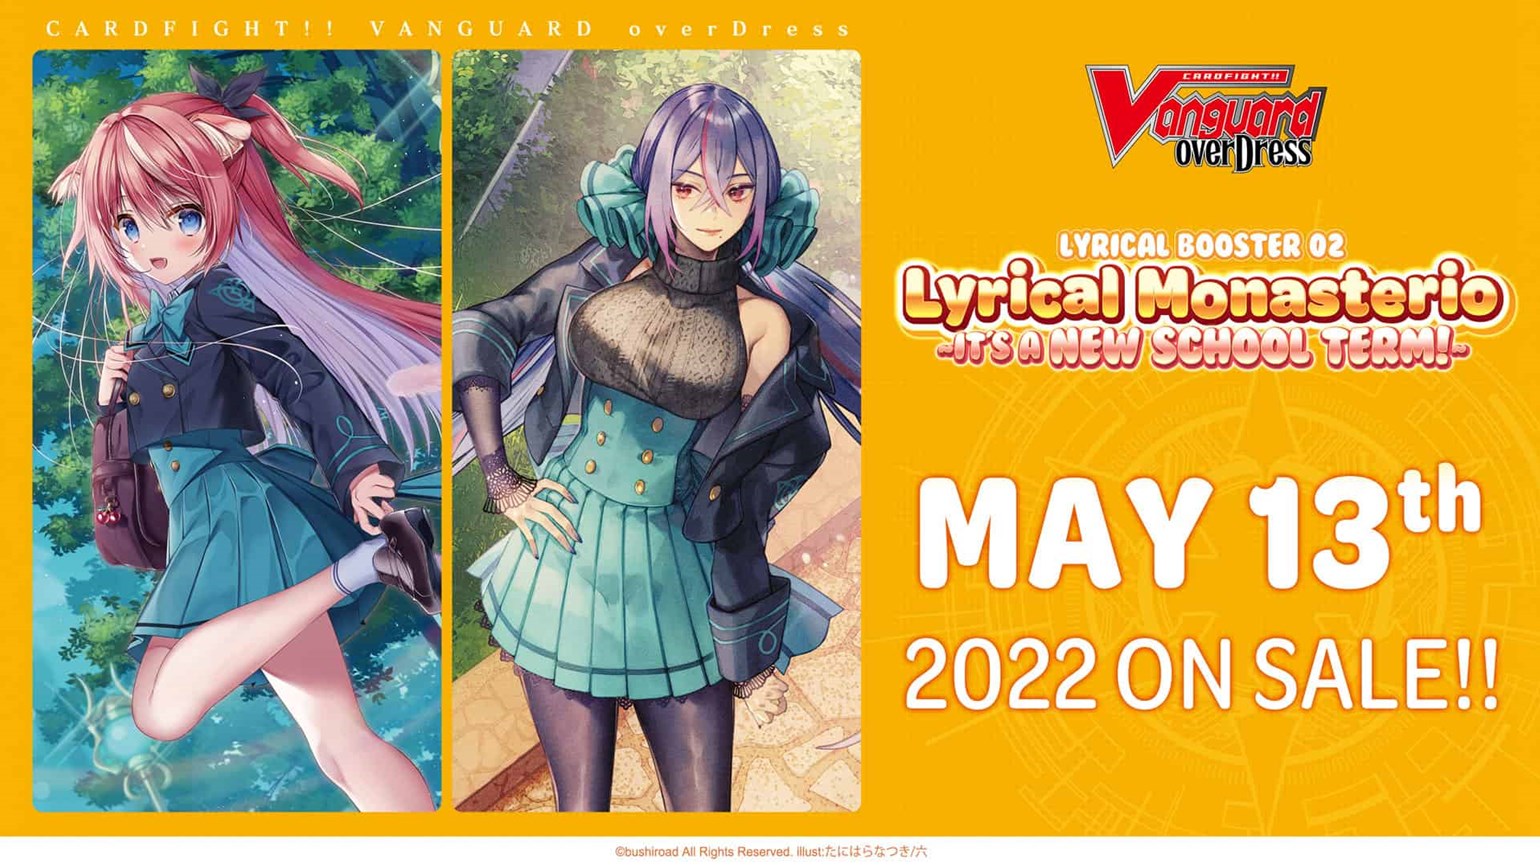 New English Edition overDress Lyrical Booster Pack 02: Lyrical Monasterio ~It’s a New School Term!~